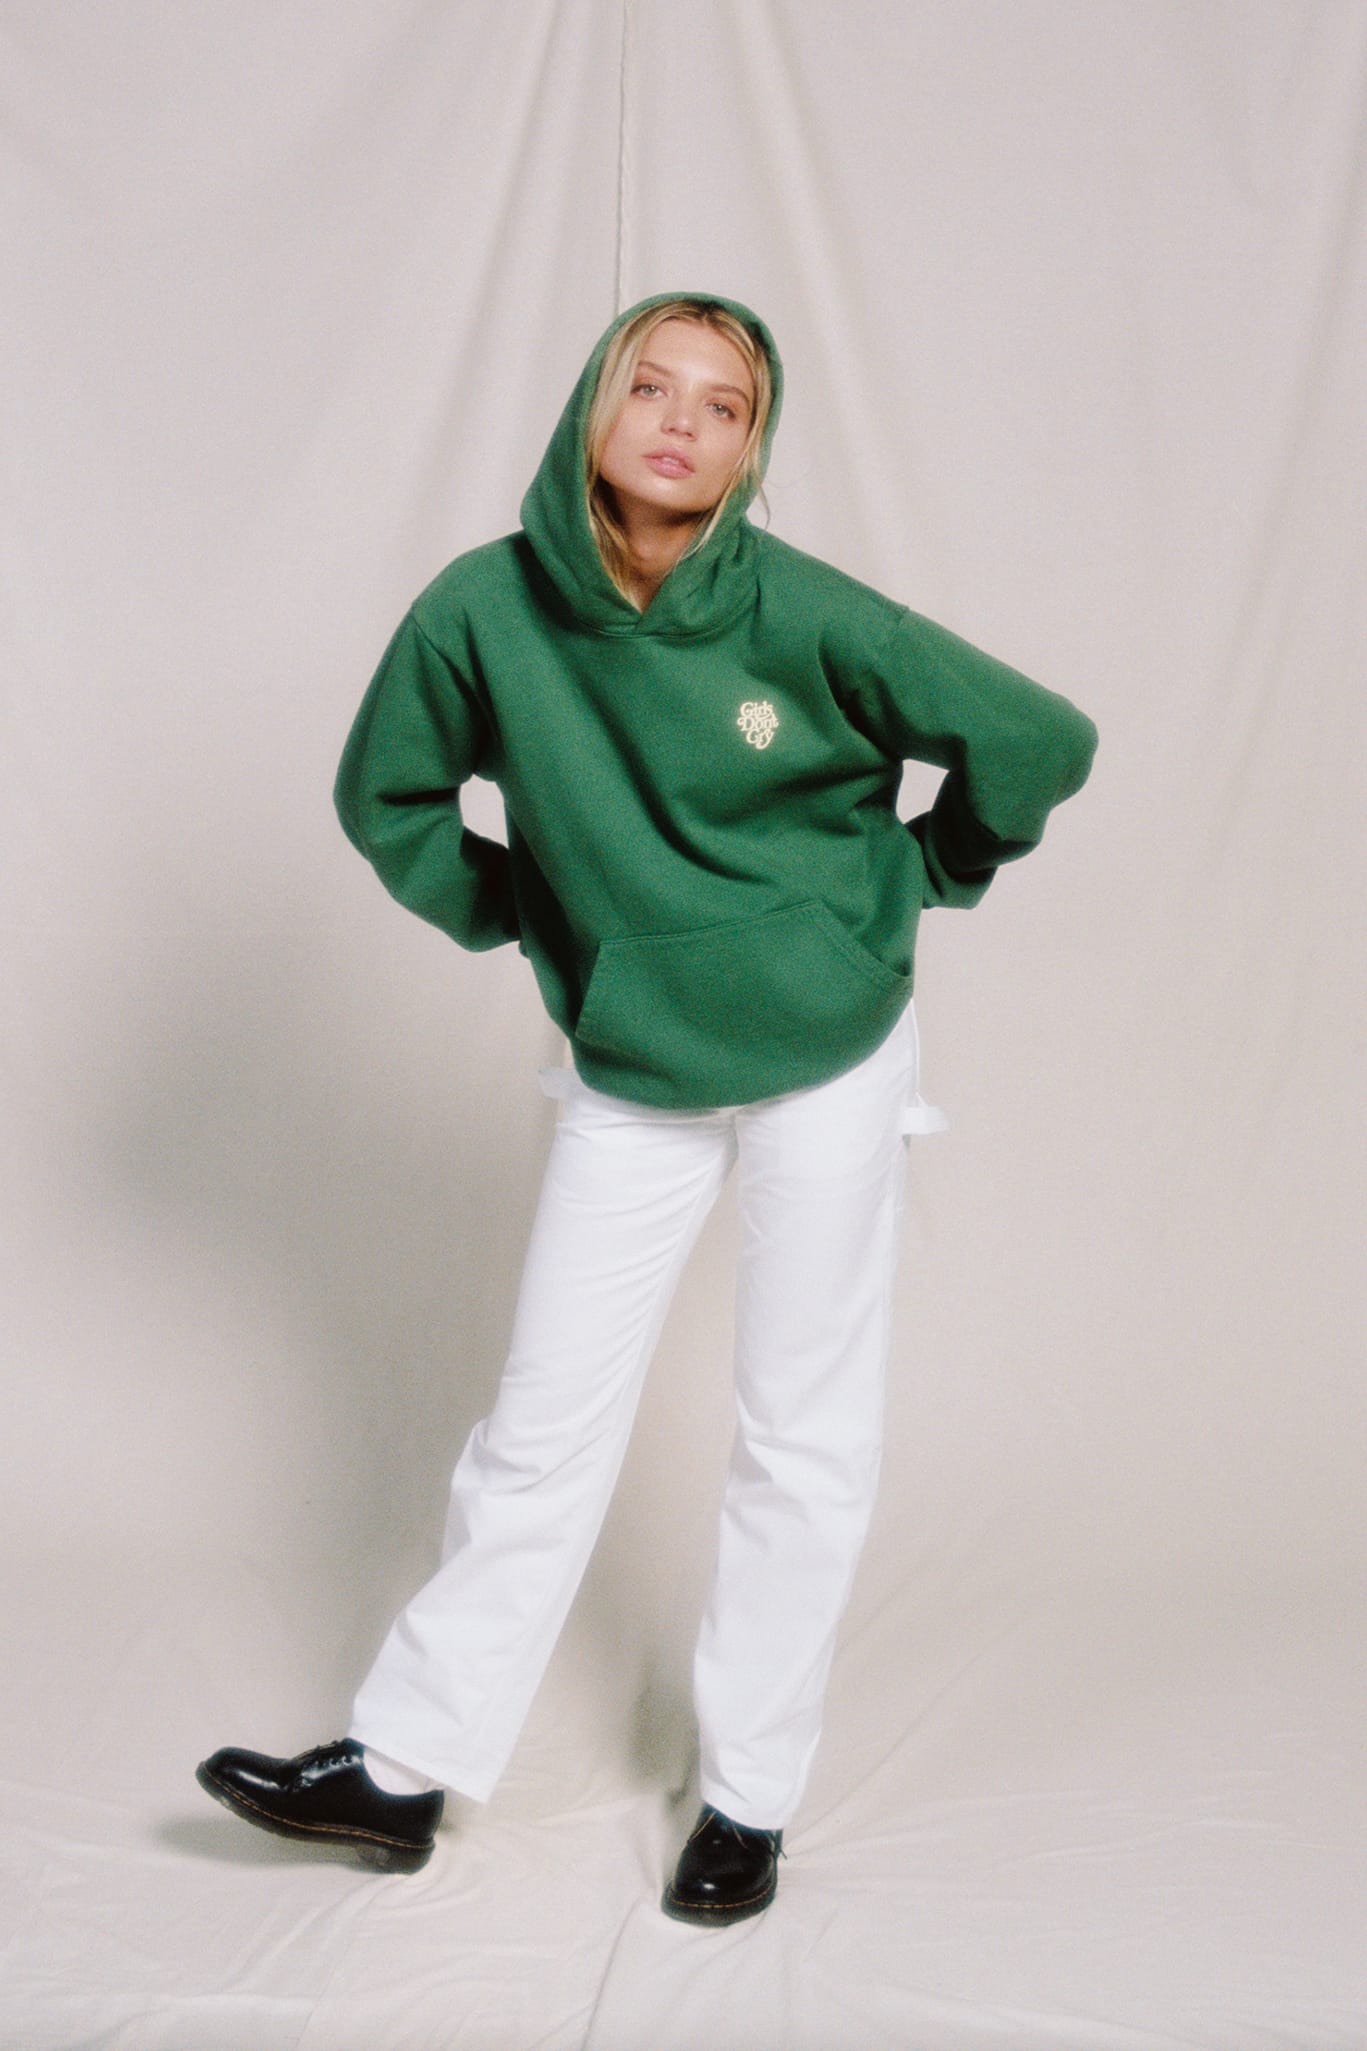 Verdy's Girls Don't Cry Releases FW19 Lookbook | Hypebae